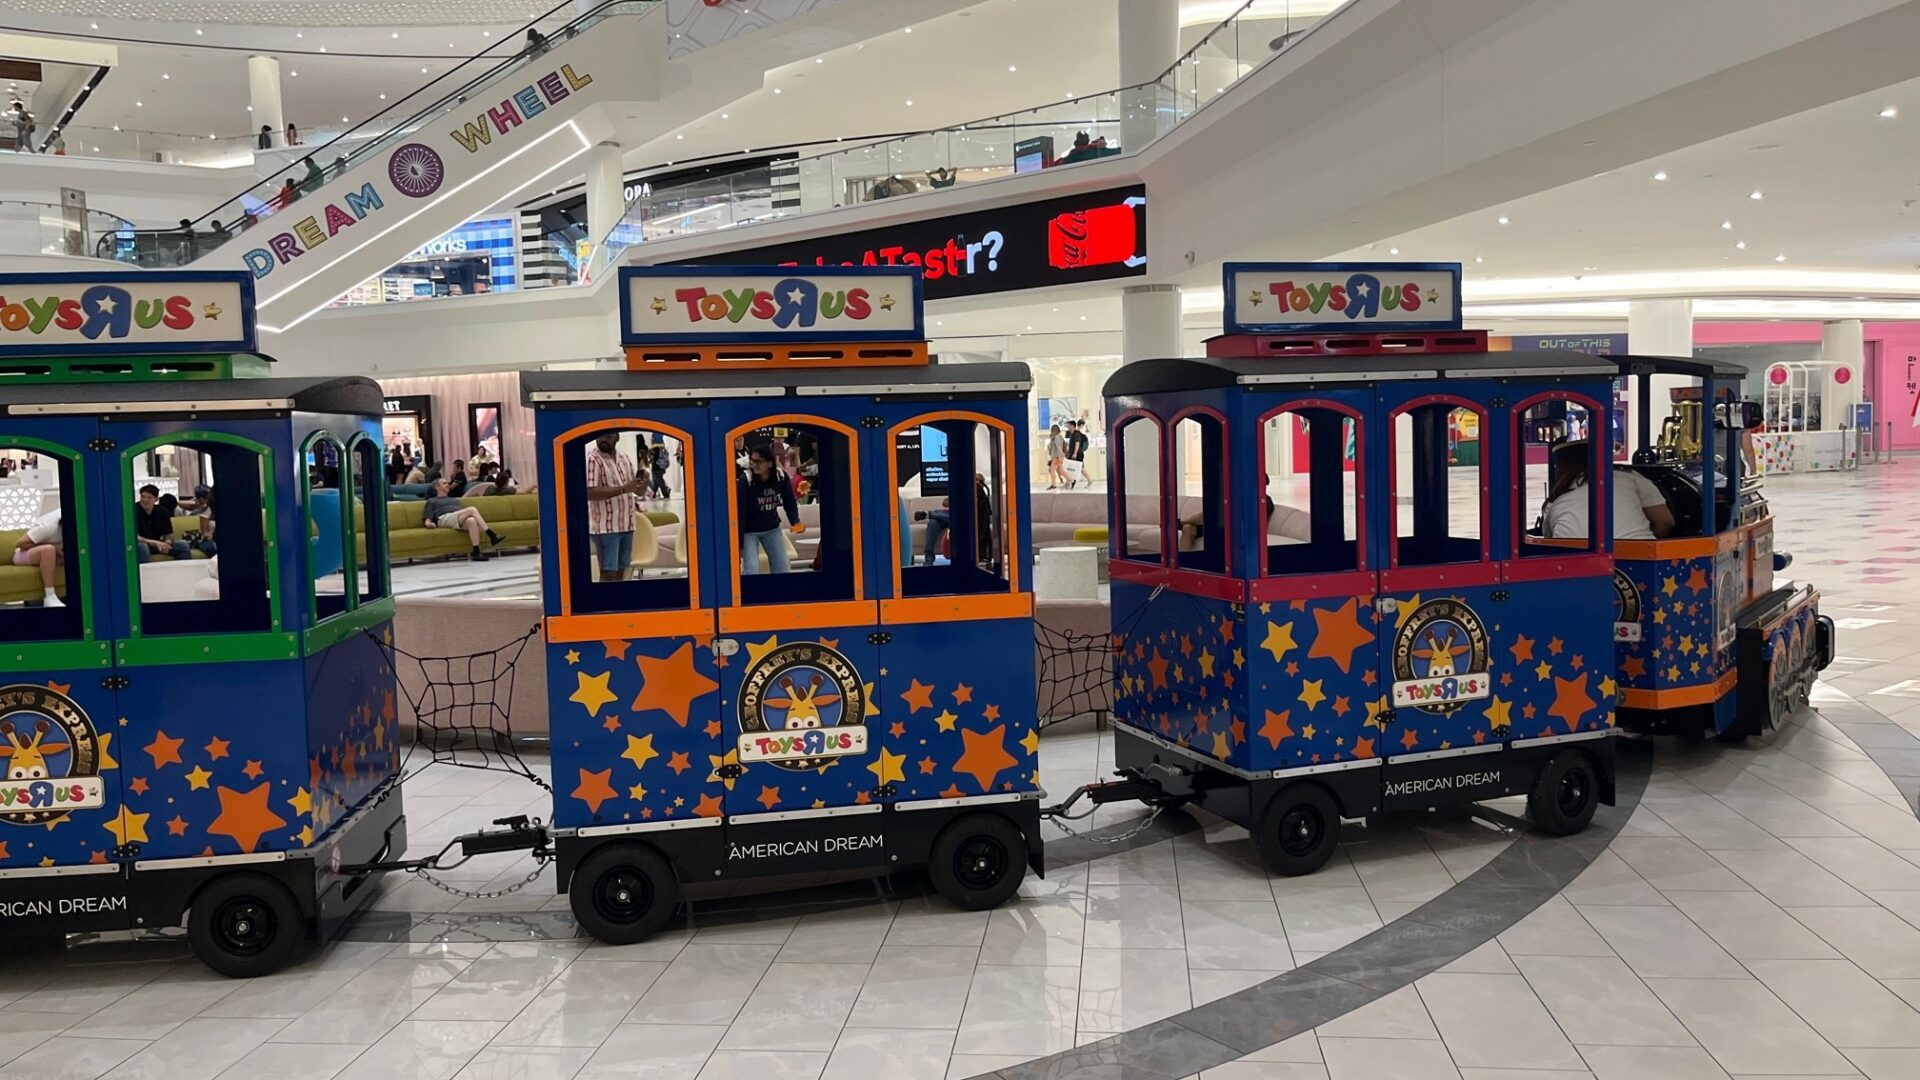 A Toys 'R' Us train makes the rounds in the mall throughways. (Photo Credit: Retail TouchPoints)